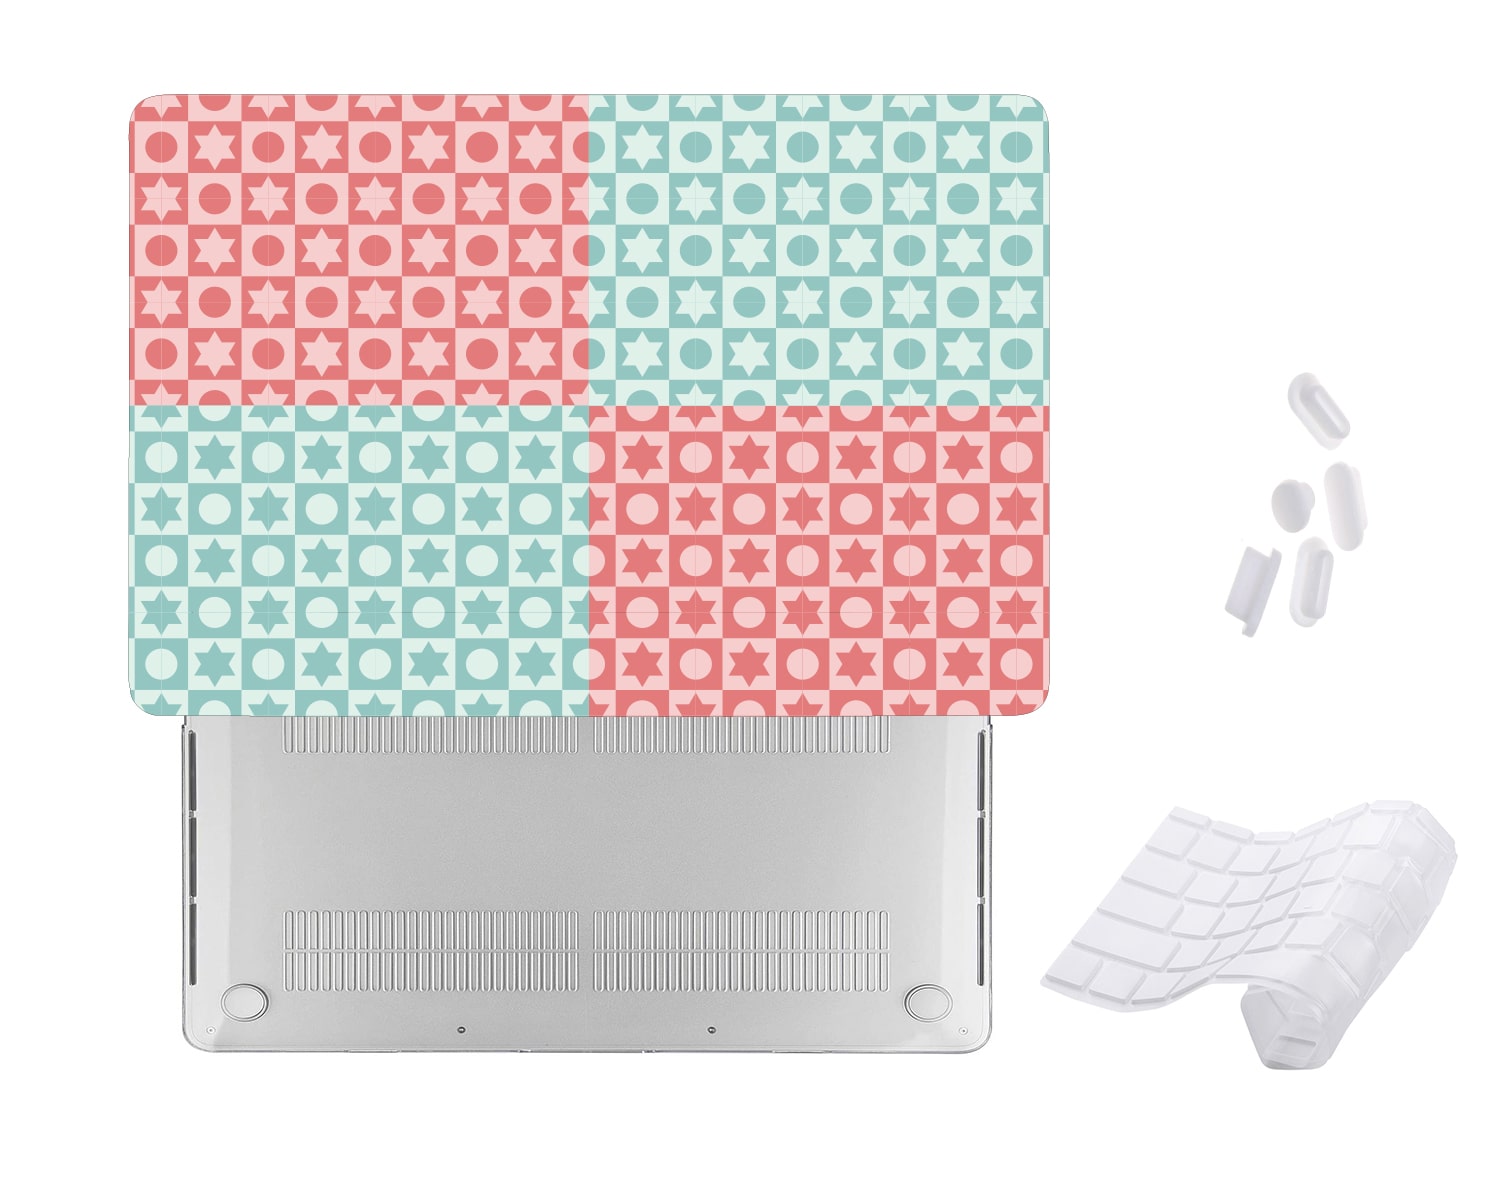 Case Cover for Macbook - Geometric Shapes Pattern Design